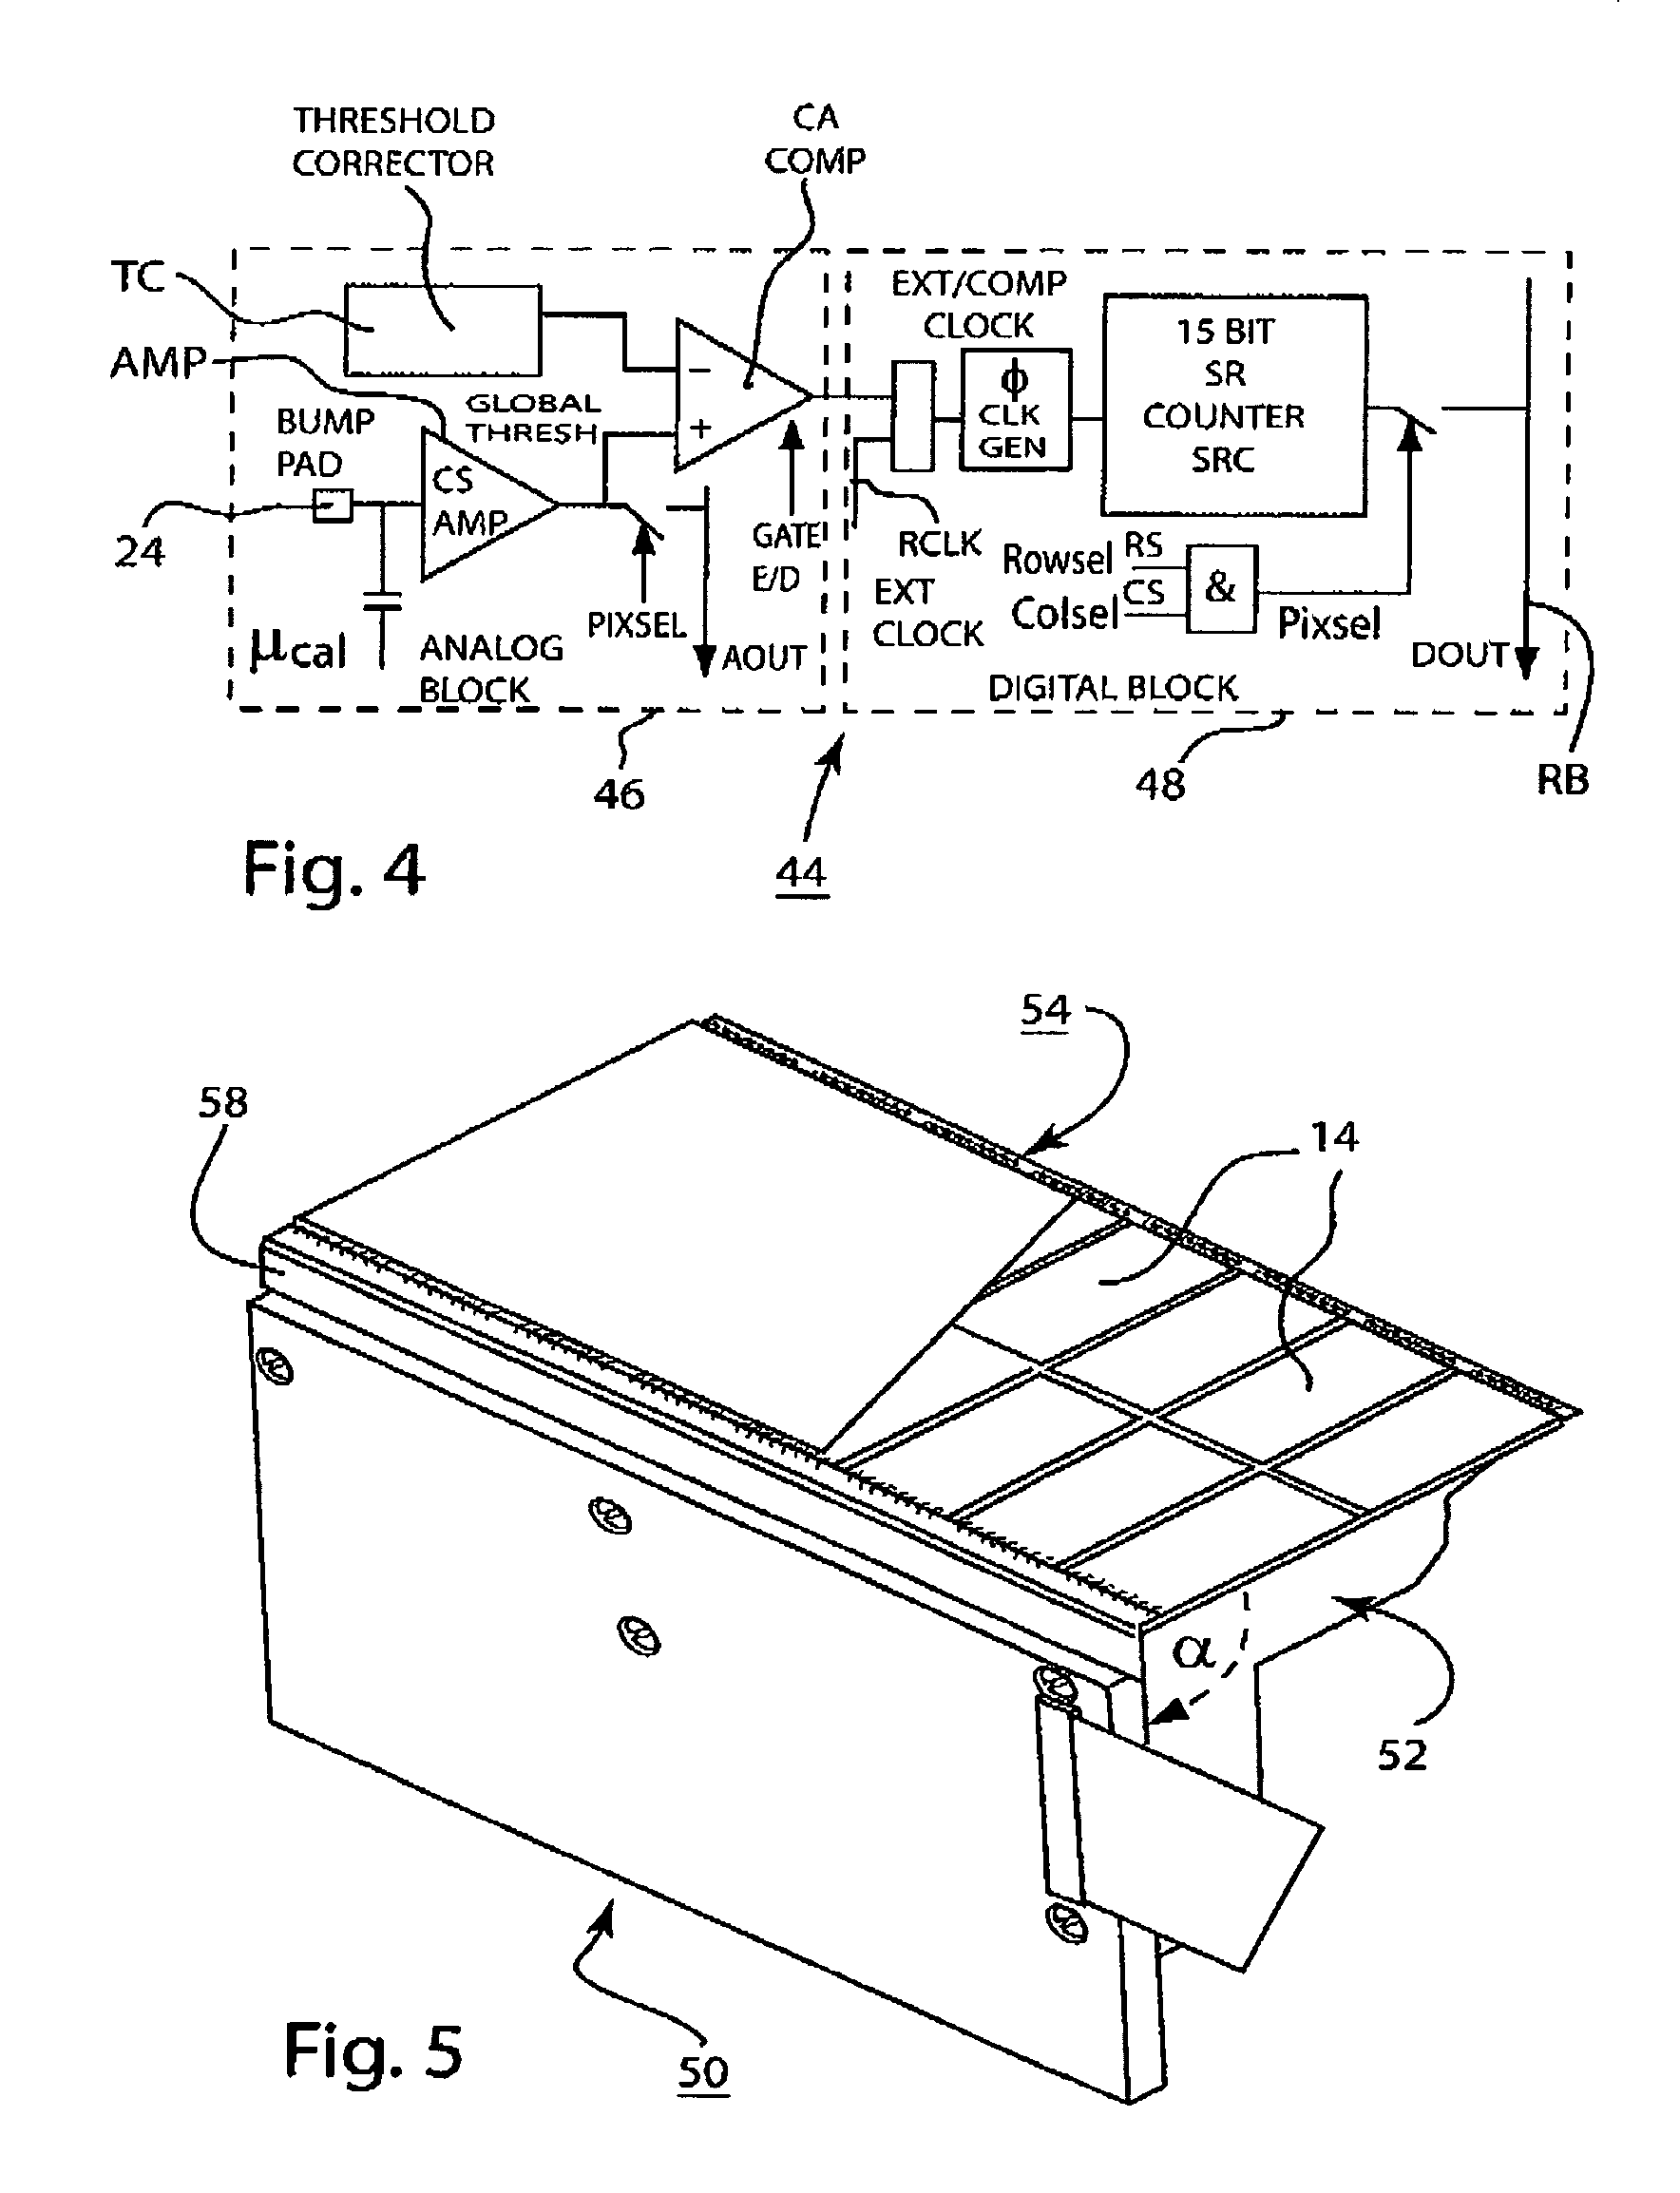 Photon counting imaging device